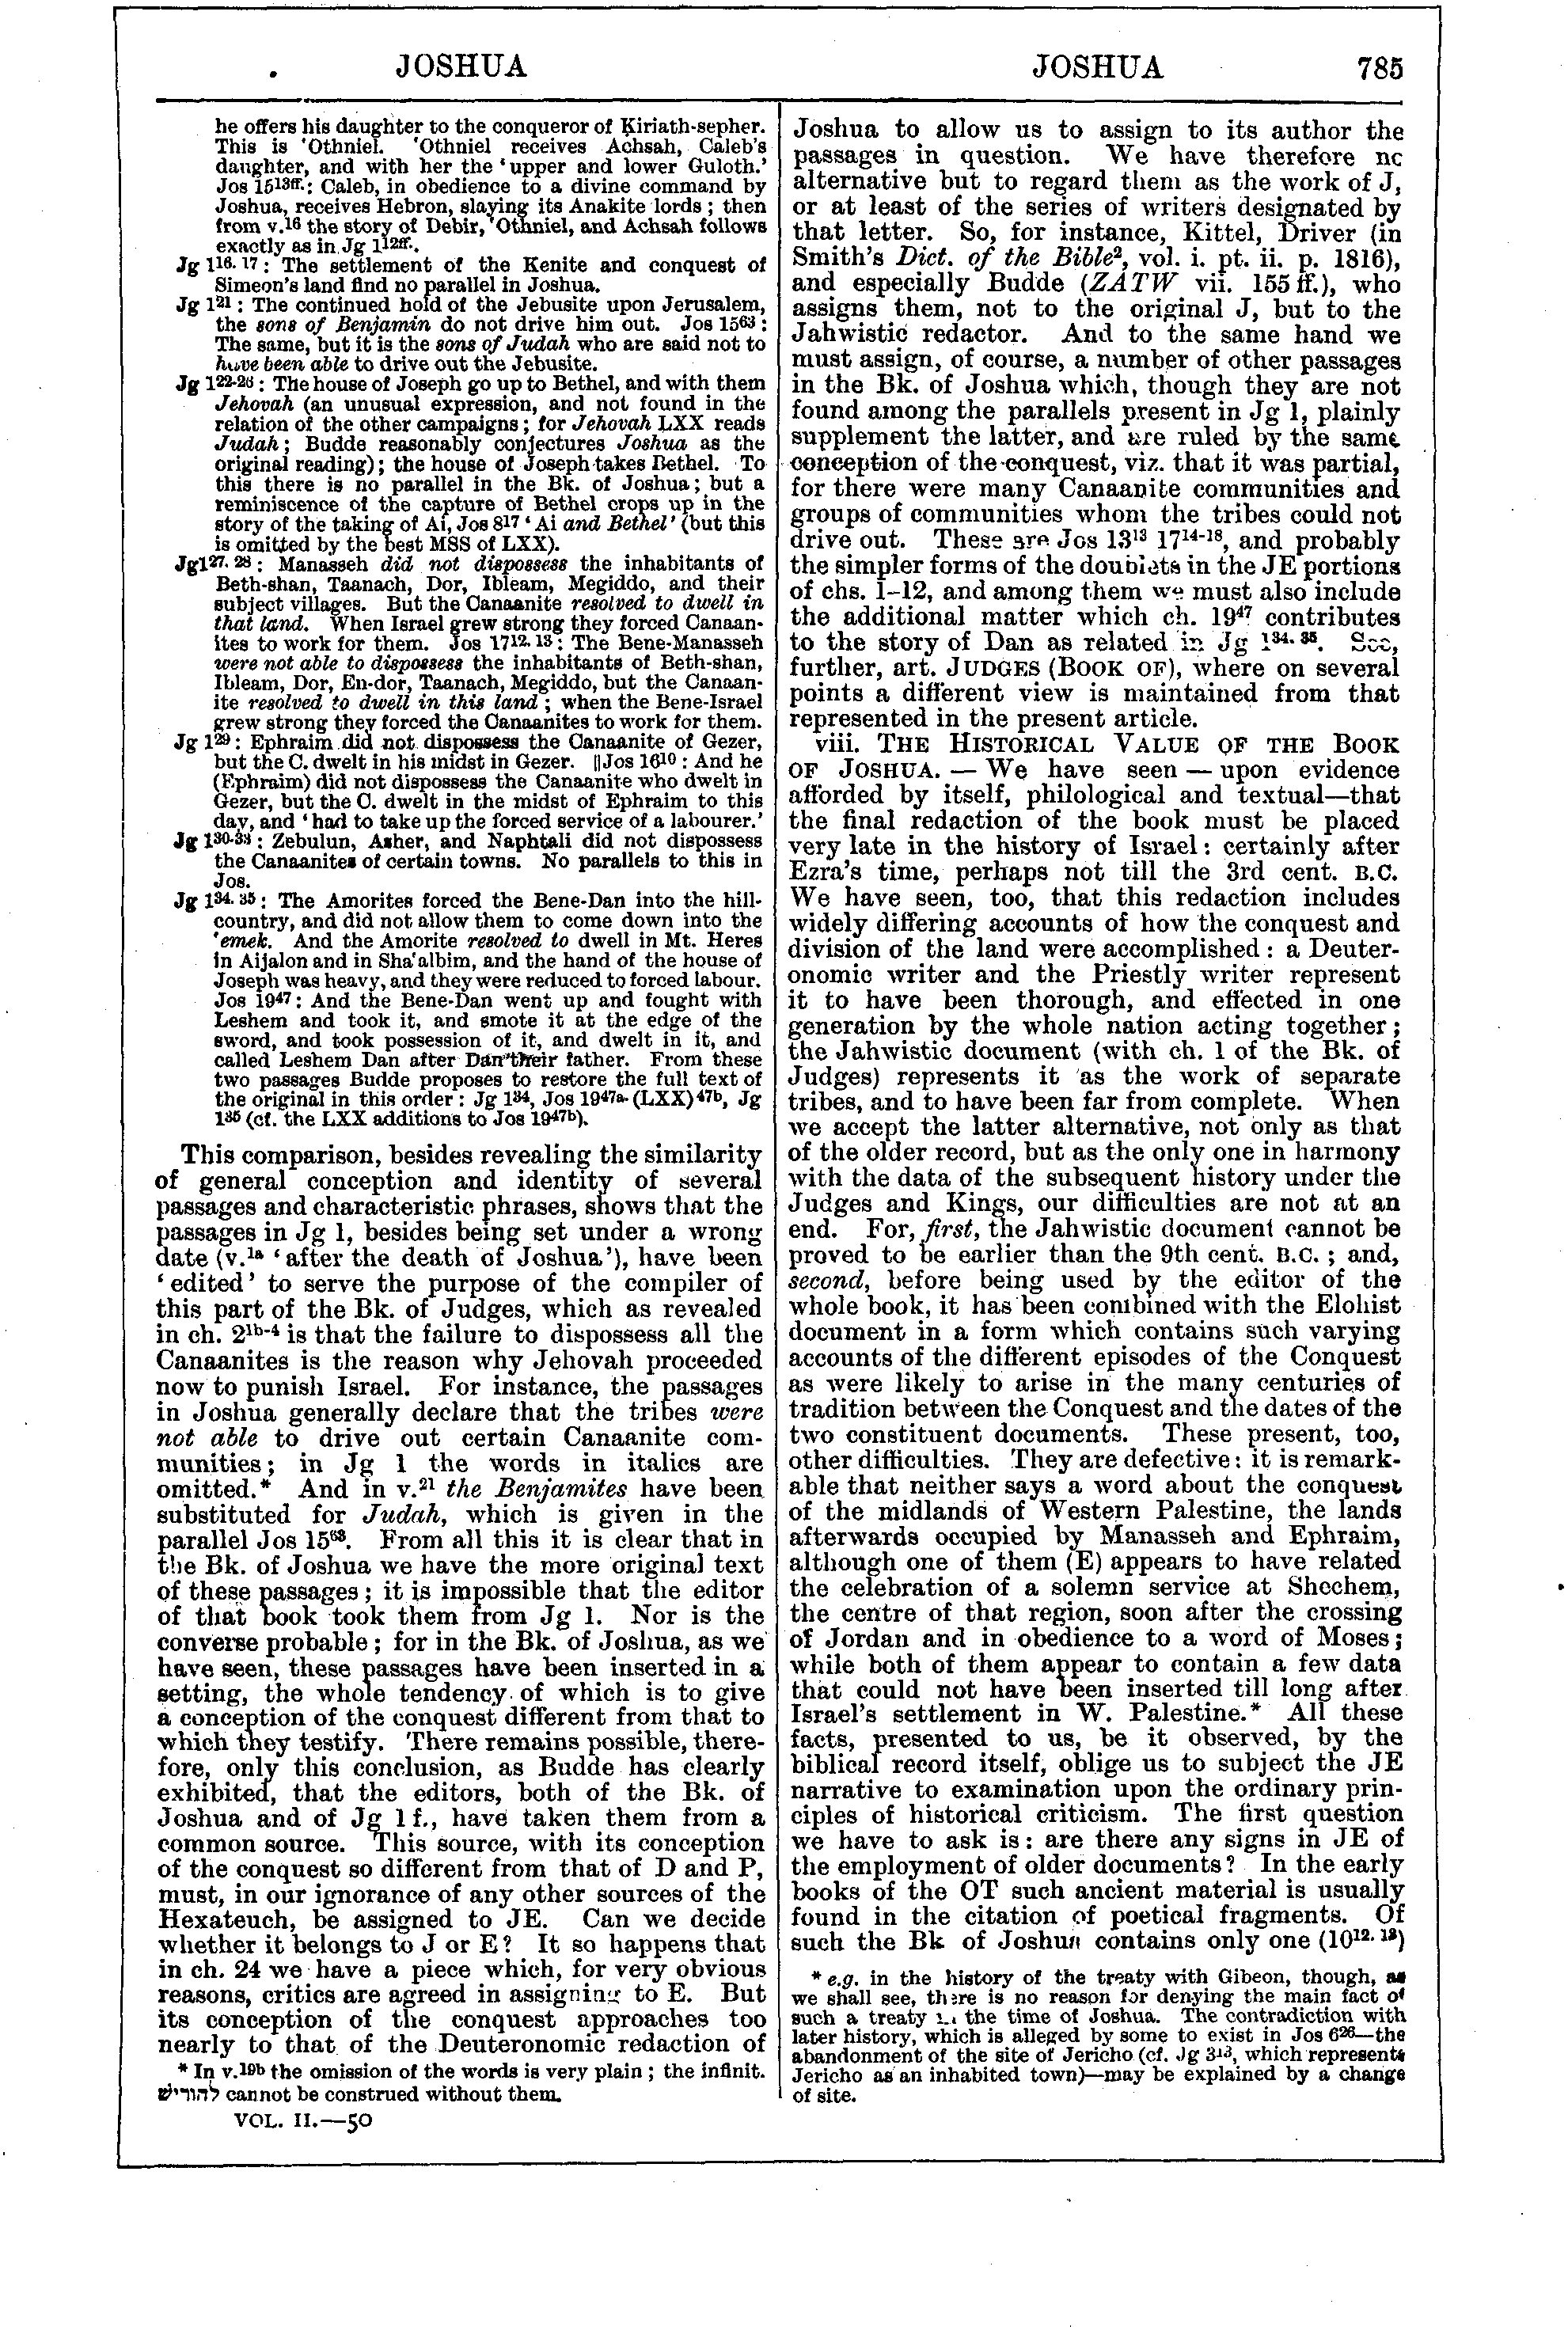 Image of page 785